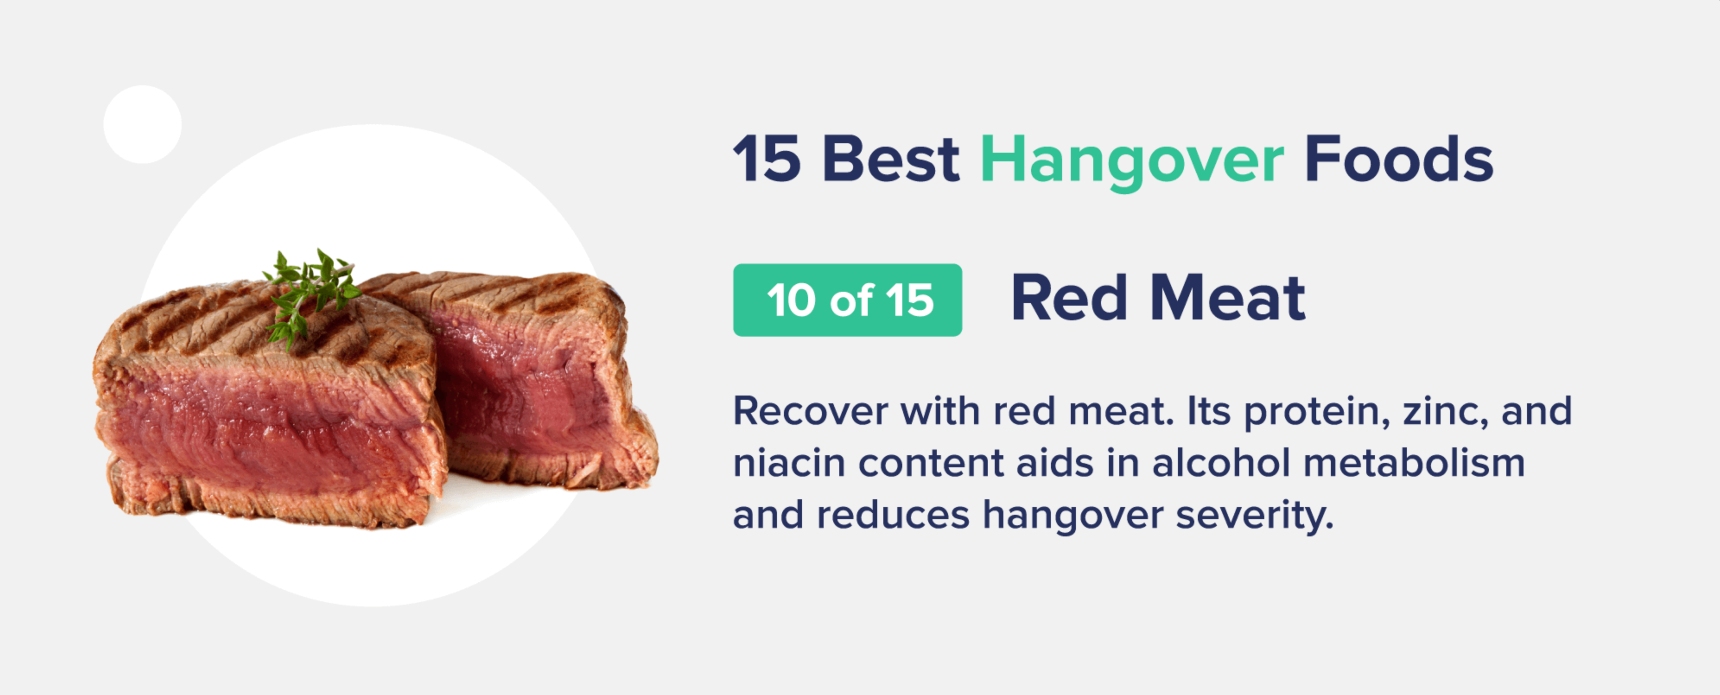 red meat best hangover foods